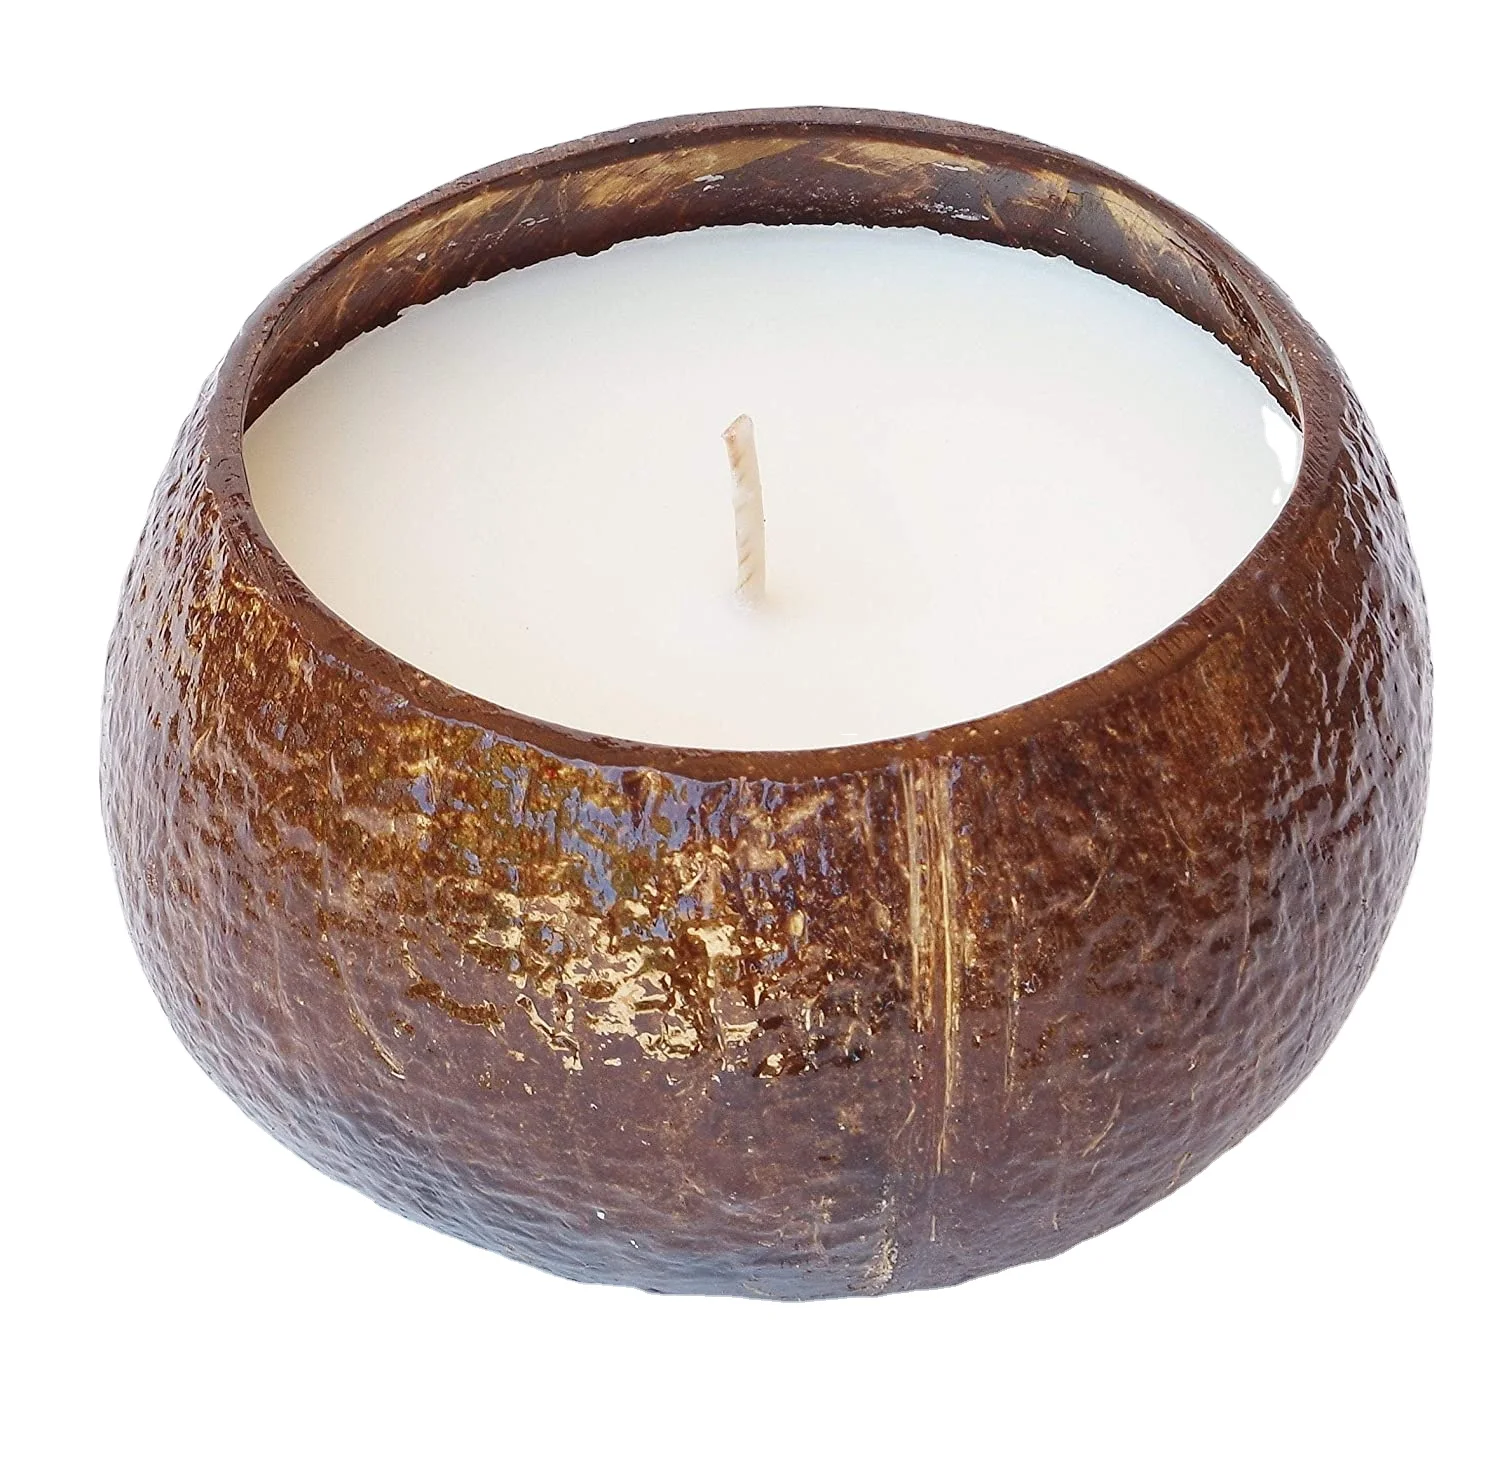 

Coconut Scented Soy Candle in Real Coconut Shell, 16oz, Hand Poured, Reusable cocobowl candle, Natural